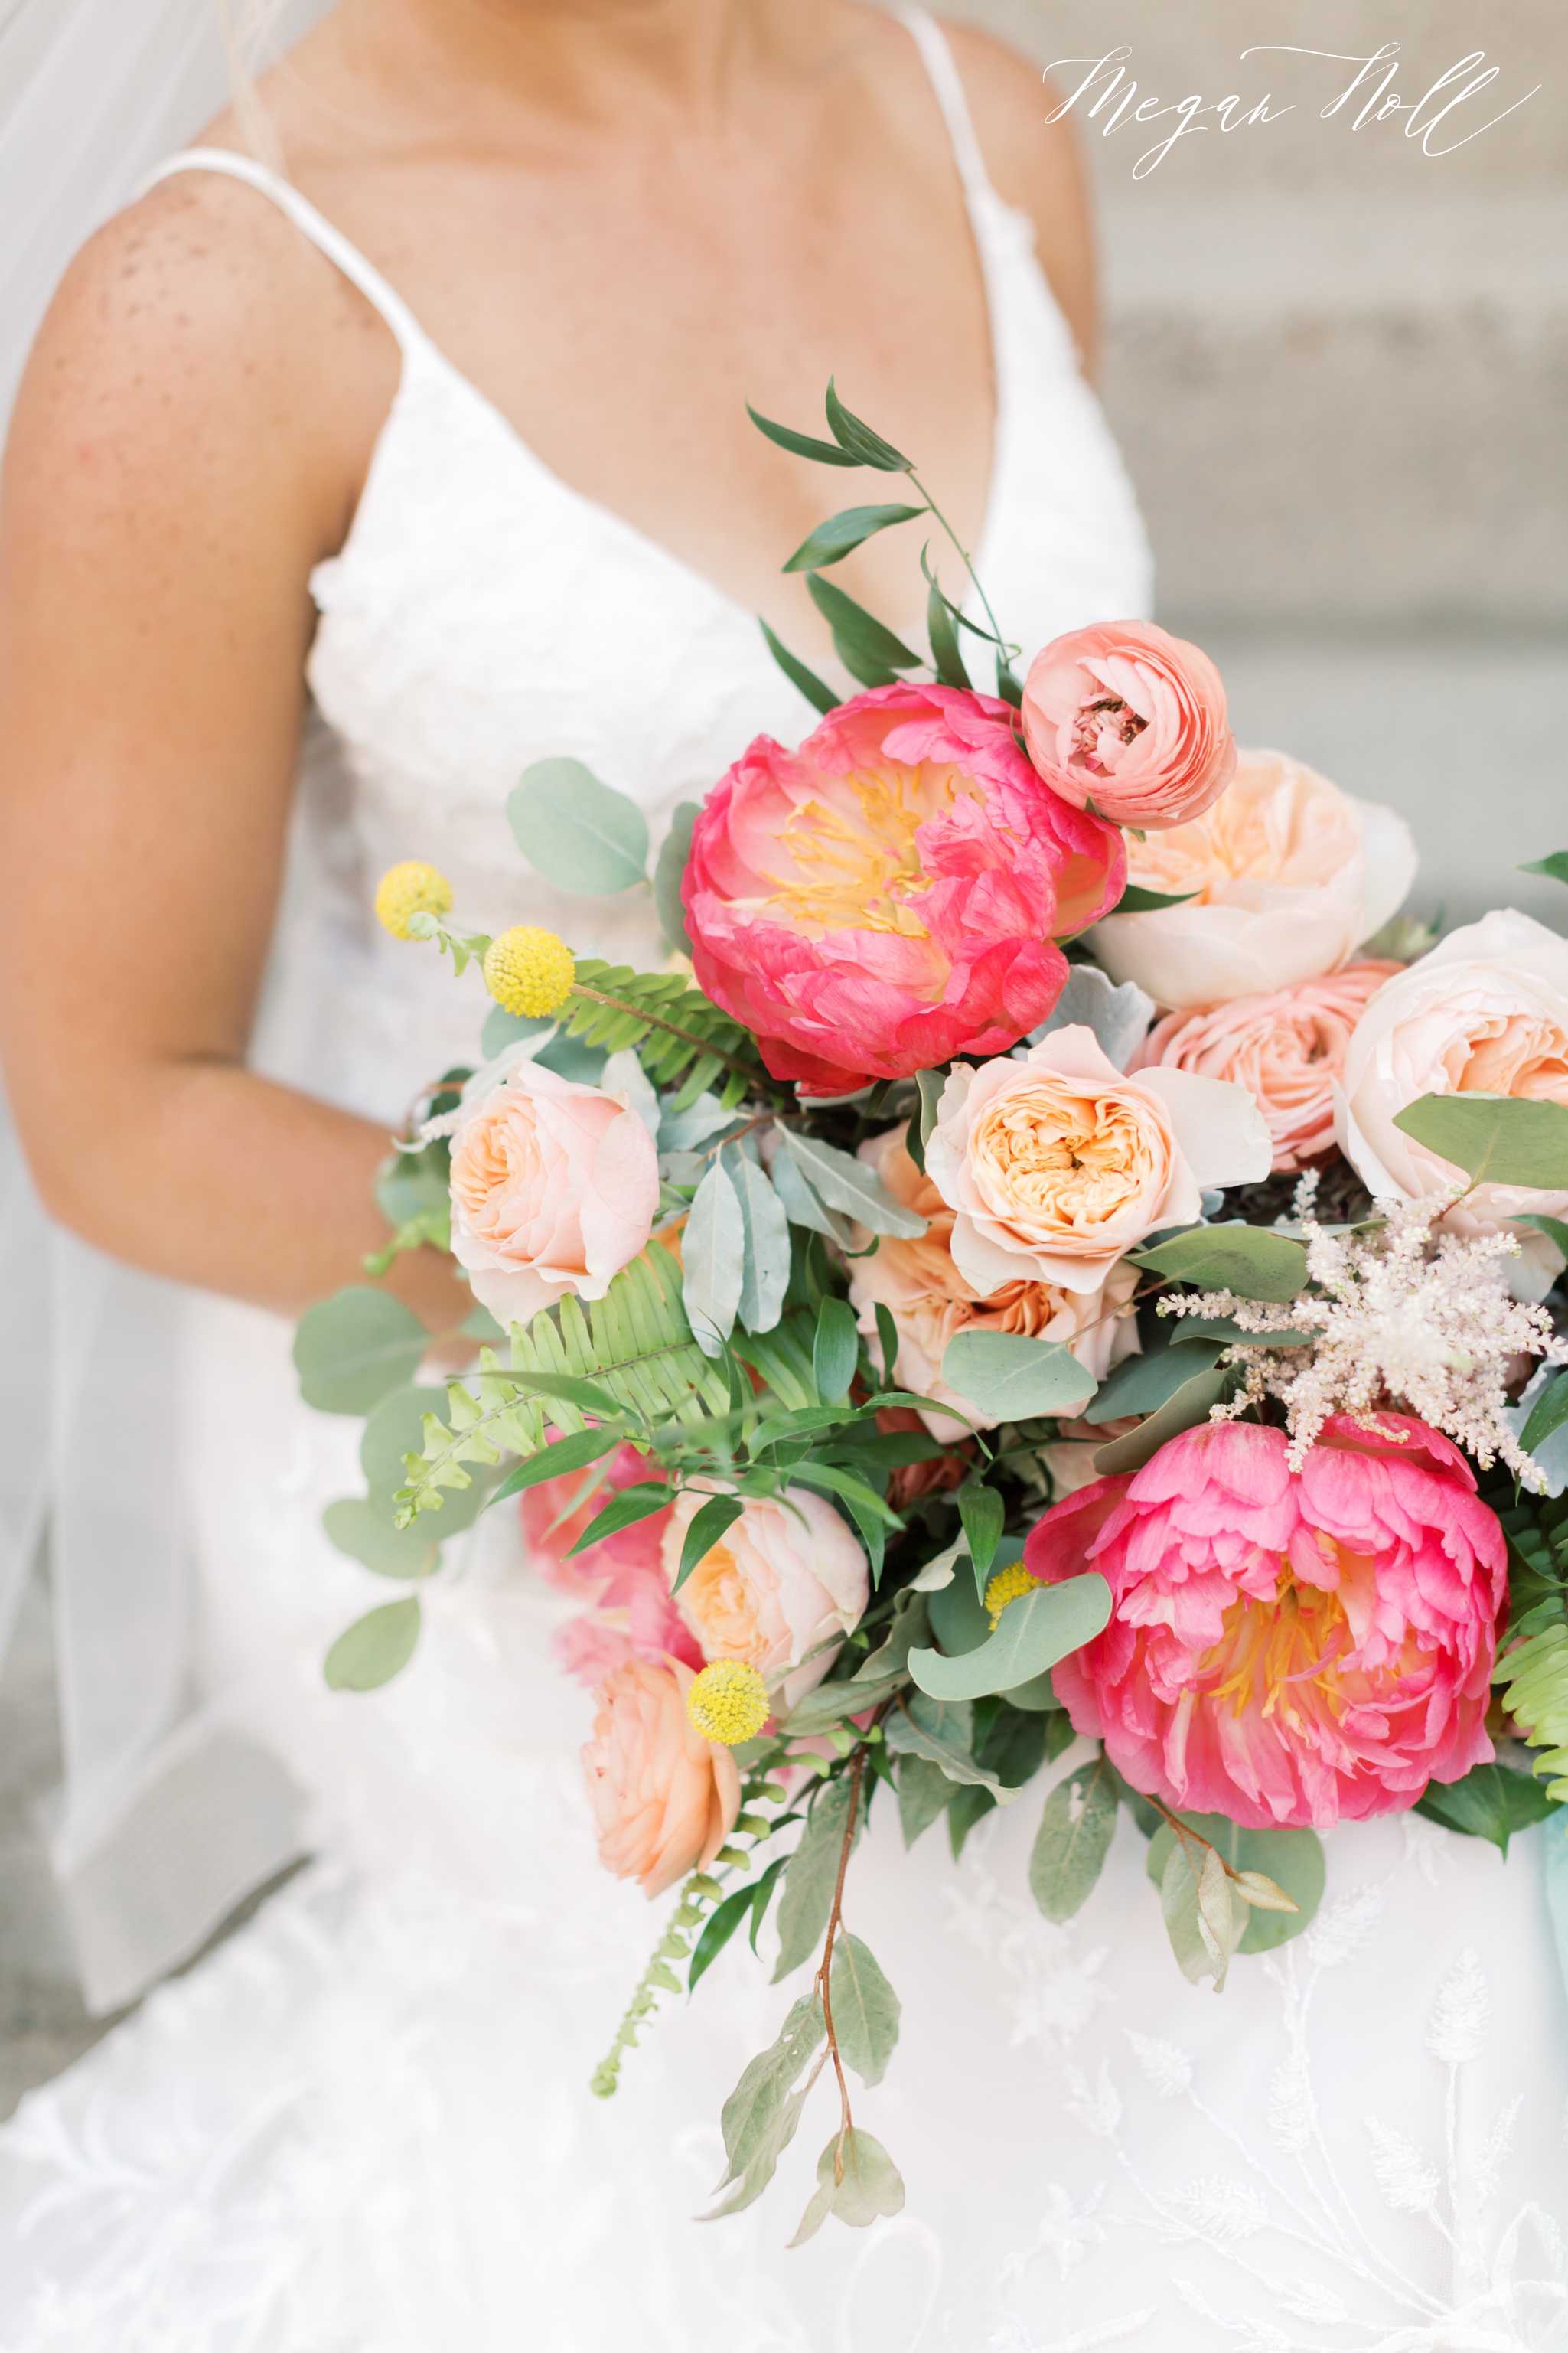 Bride holding wedding flowers from floral verde